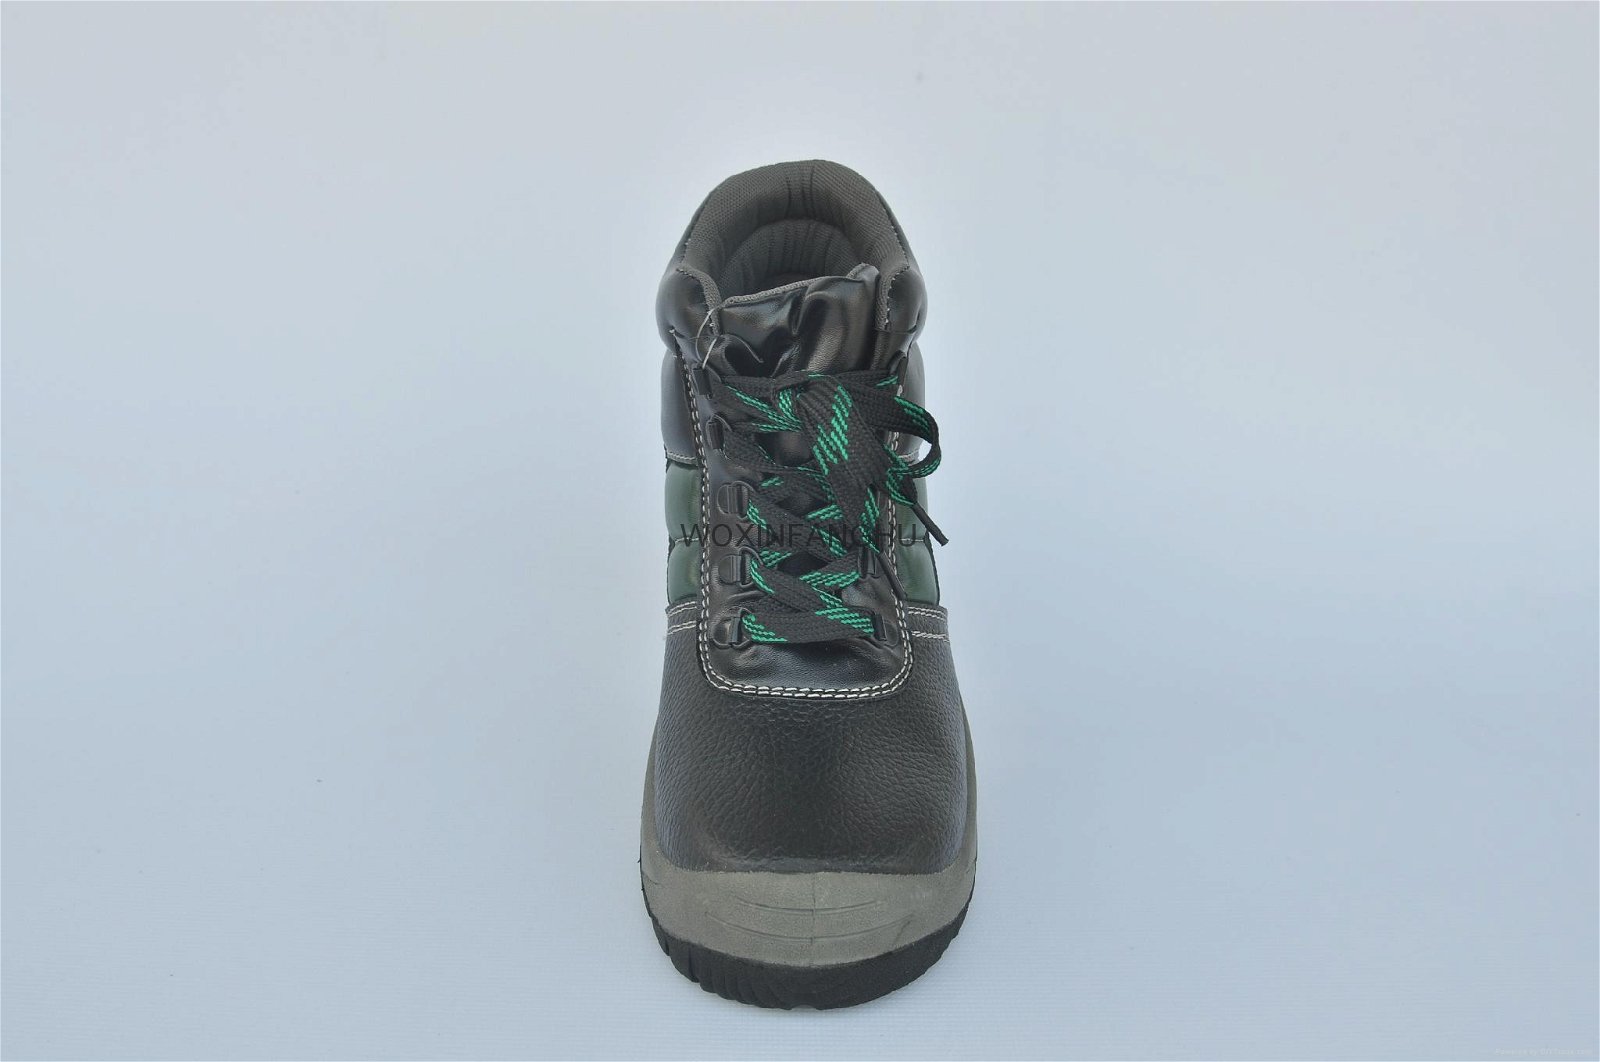 safety shoes WXHC-P003 (China Manufacturer) - Work & Safety Shoes ...